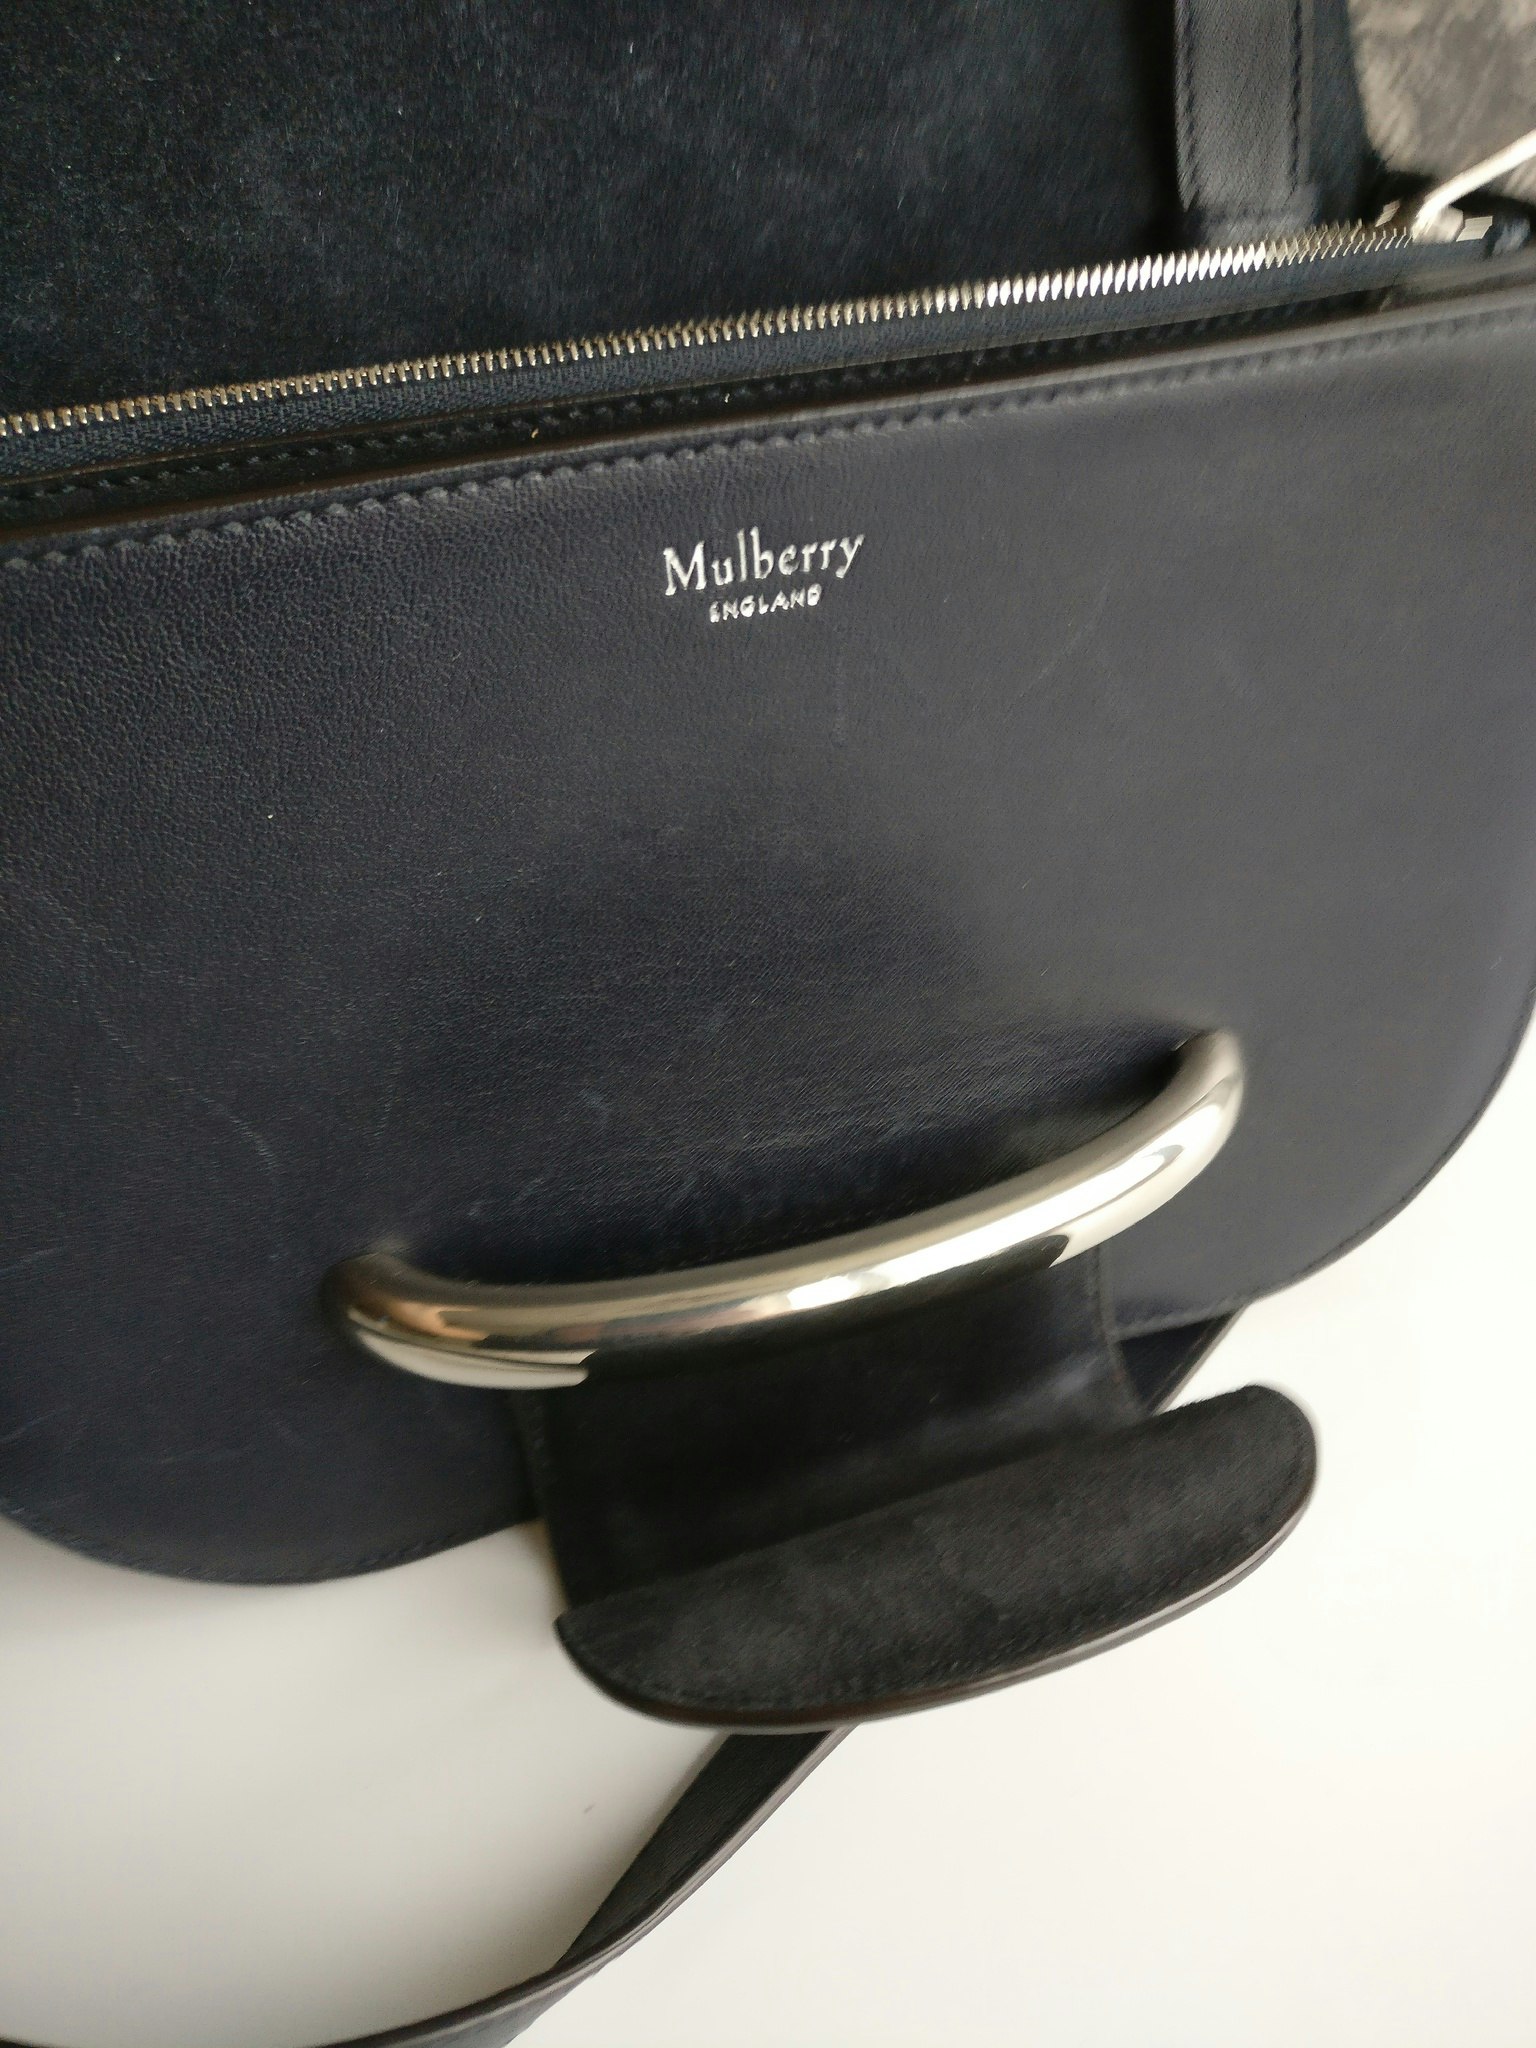 Mulberry Selwood